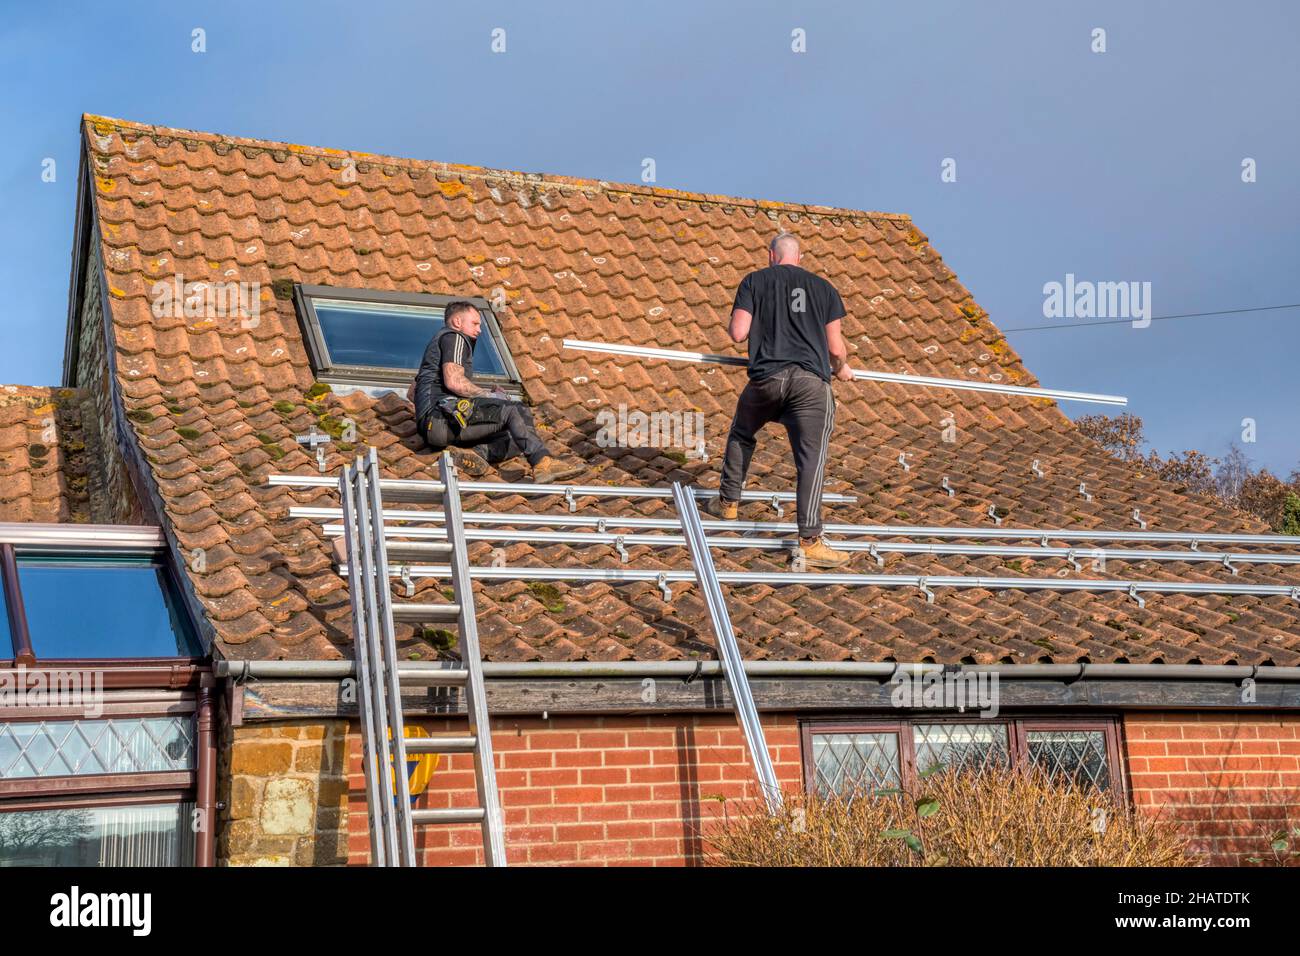 Workers installing solar panels or pv cells on the pantiled roof of a Norfolk cottage.  NB: The premises in the photograph are Property Released. Stock Photo